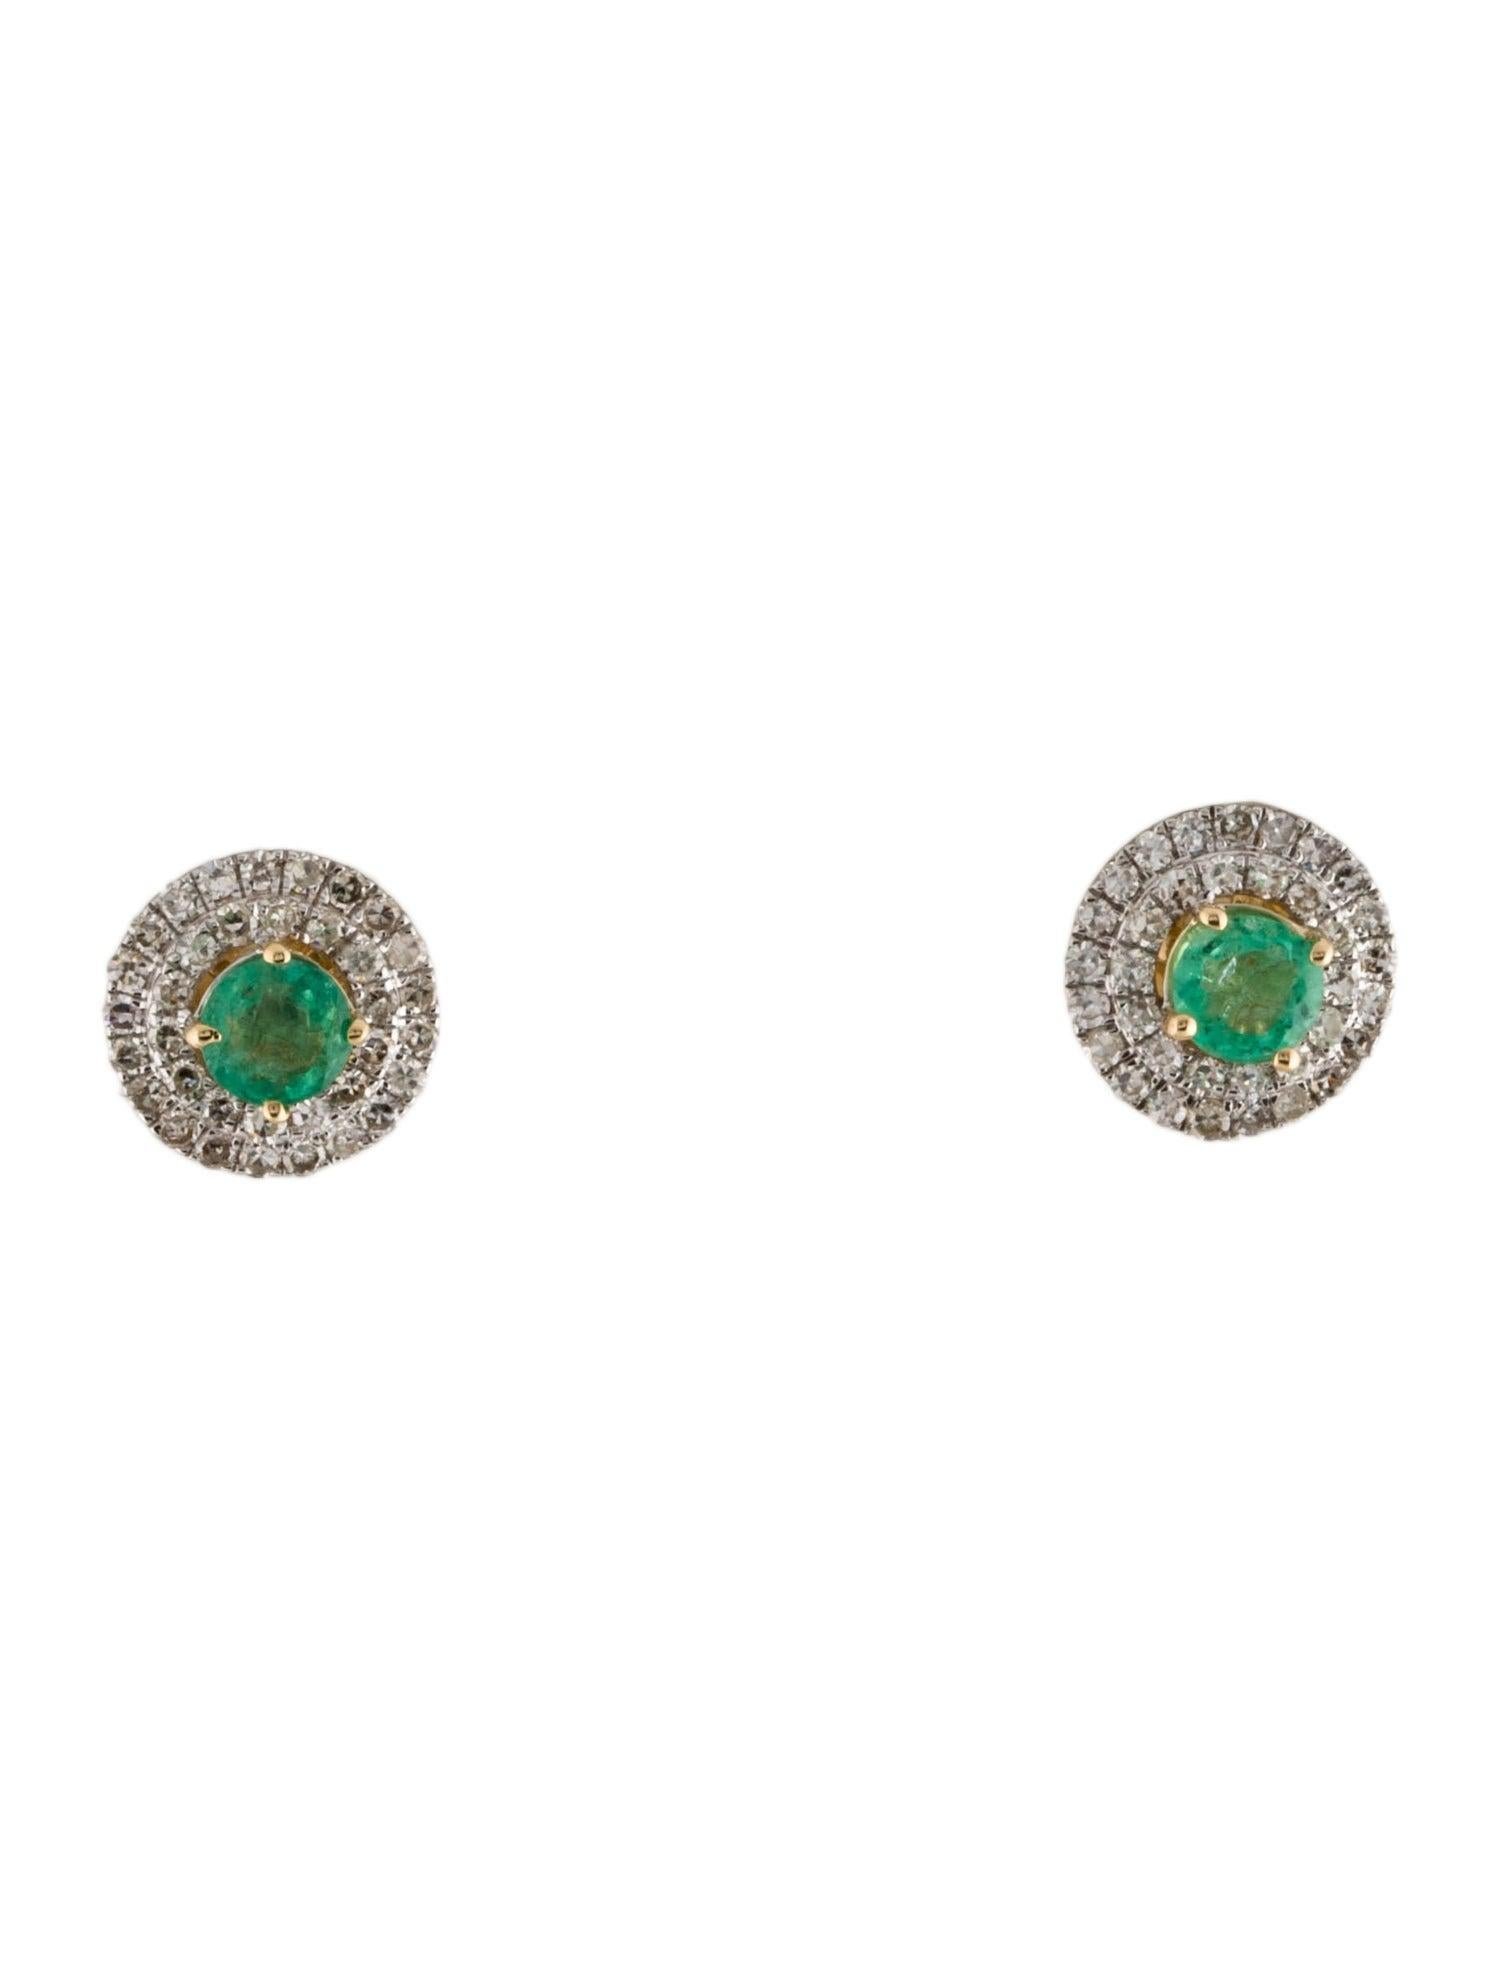 14K Emerald & Diamond Stud Earrings - Elegant Gemstone Jewelry, Timeless Sparkle In New Condition For Sale In Holtsville, NY